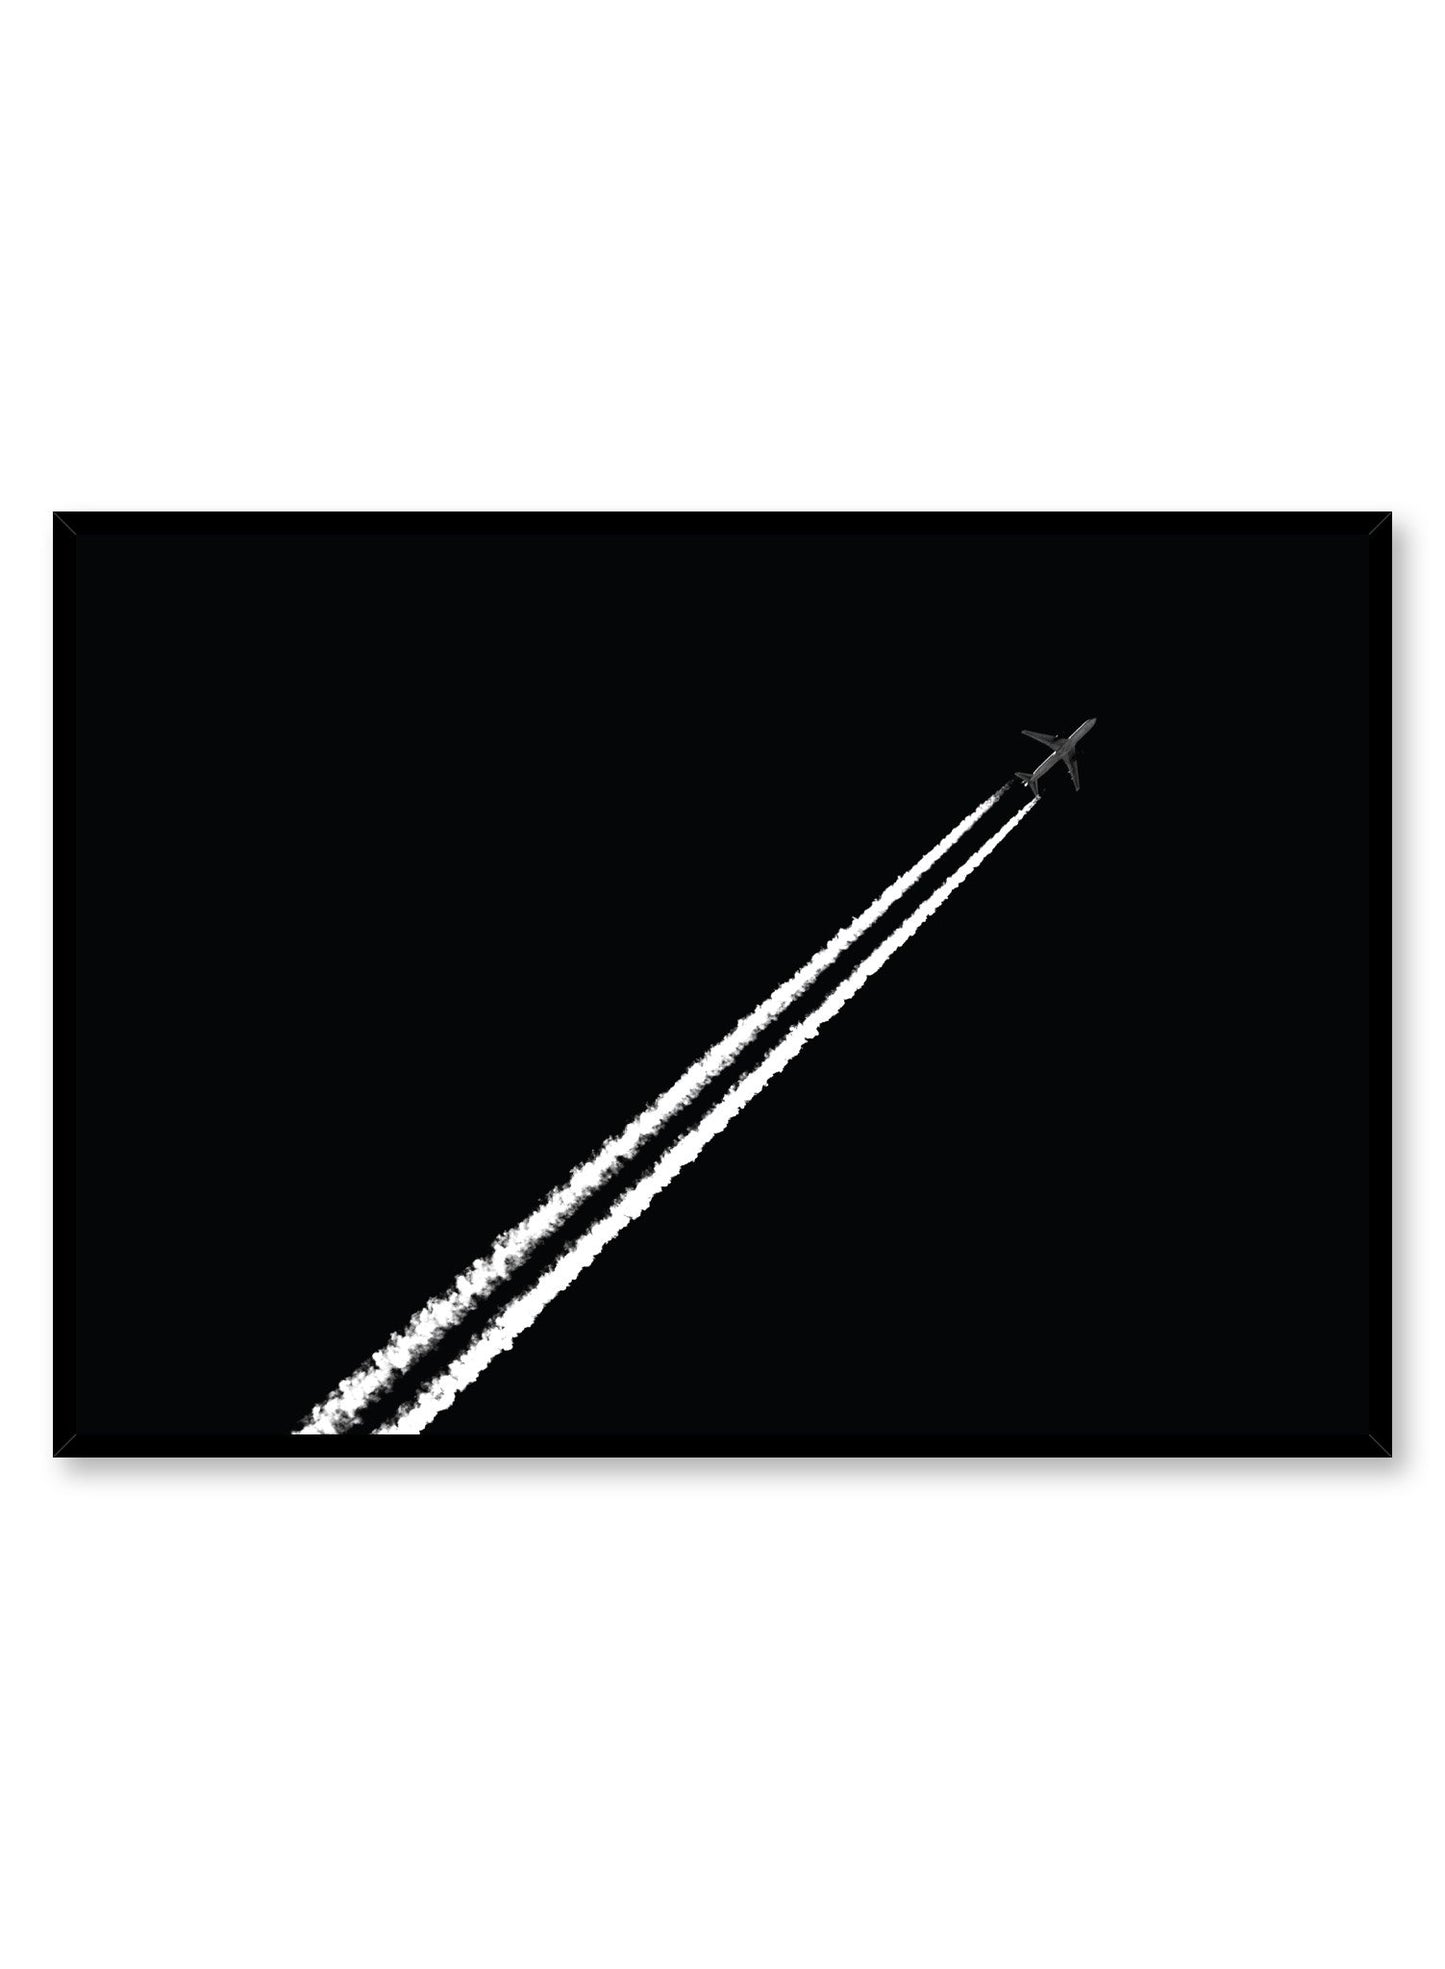 Modern minimalist poster by Opposite Wall with black and white photography of airplane contrail